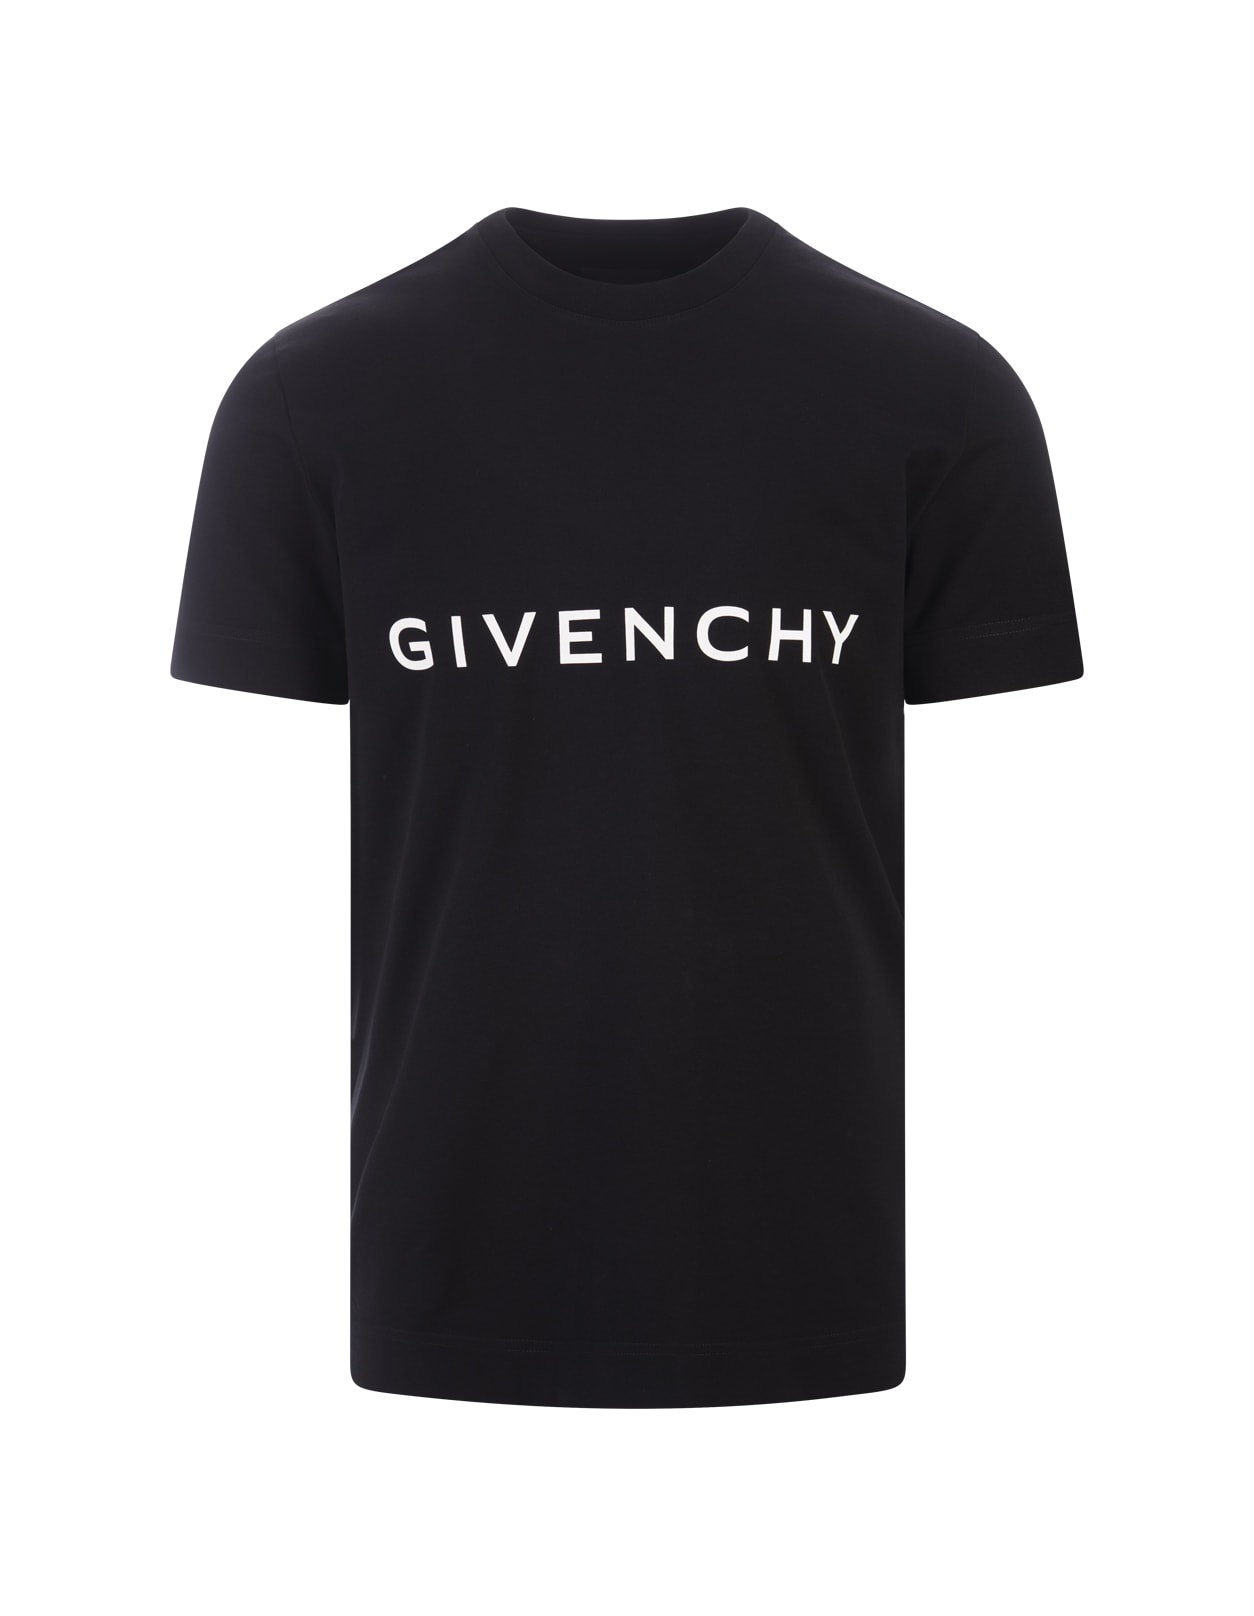 Givenchy Black T-shirt With  Archetype Print On Front